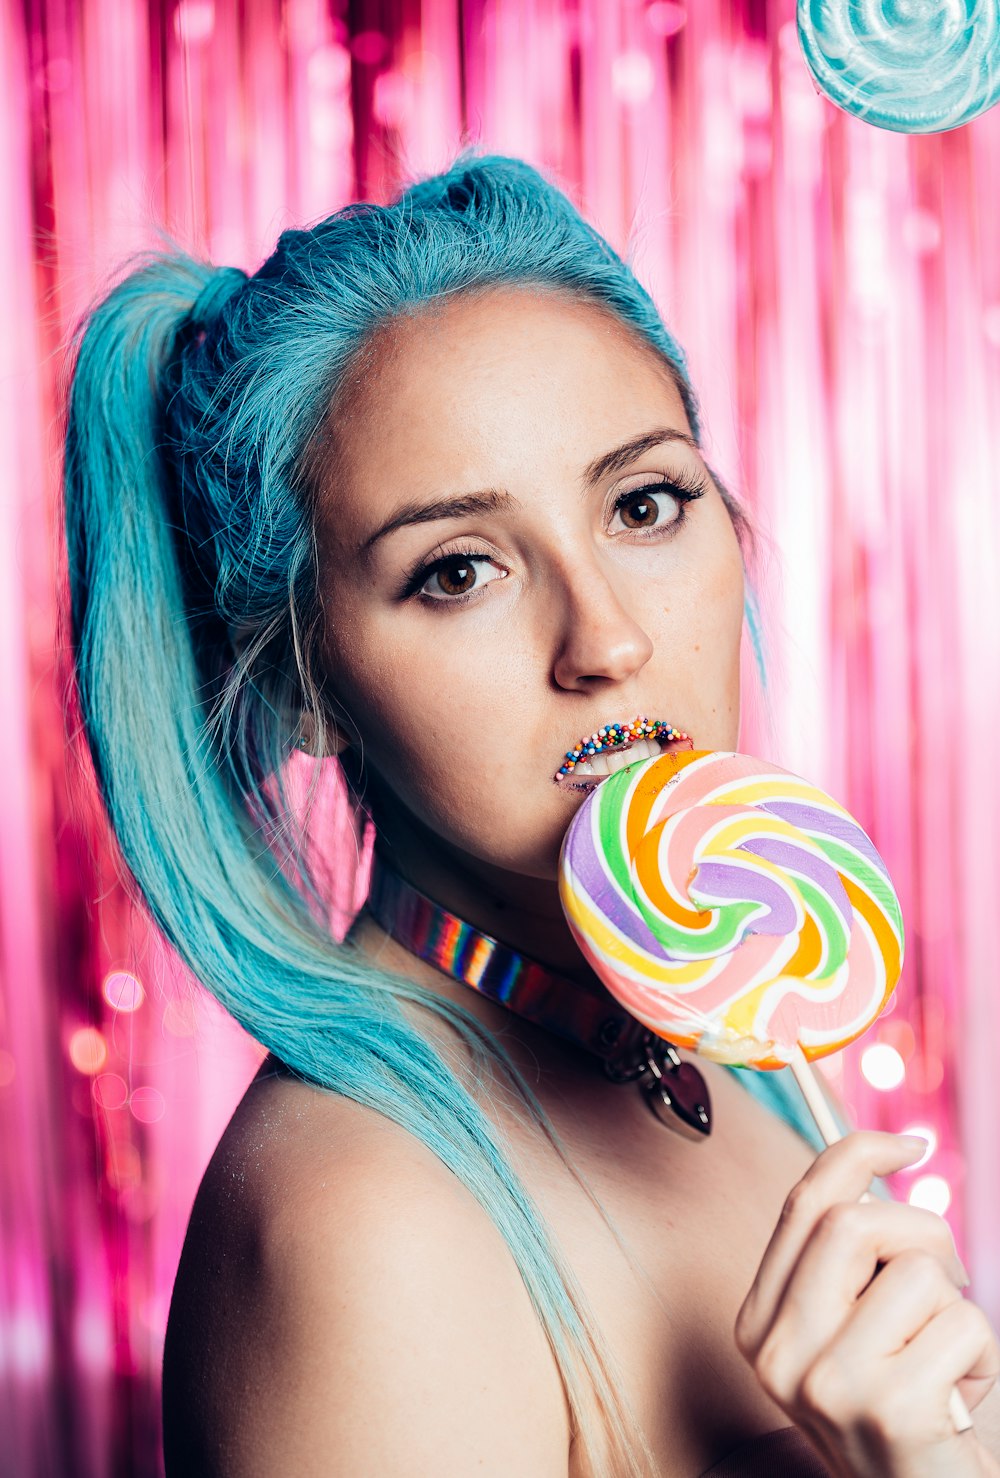 woman with purple hair holding lollipop